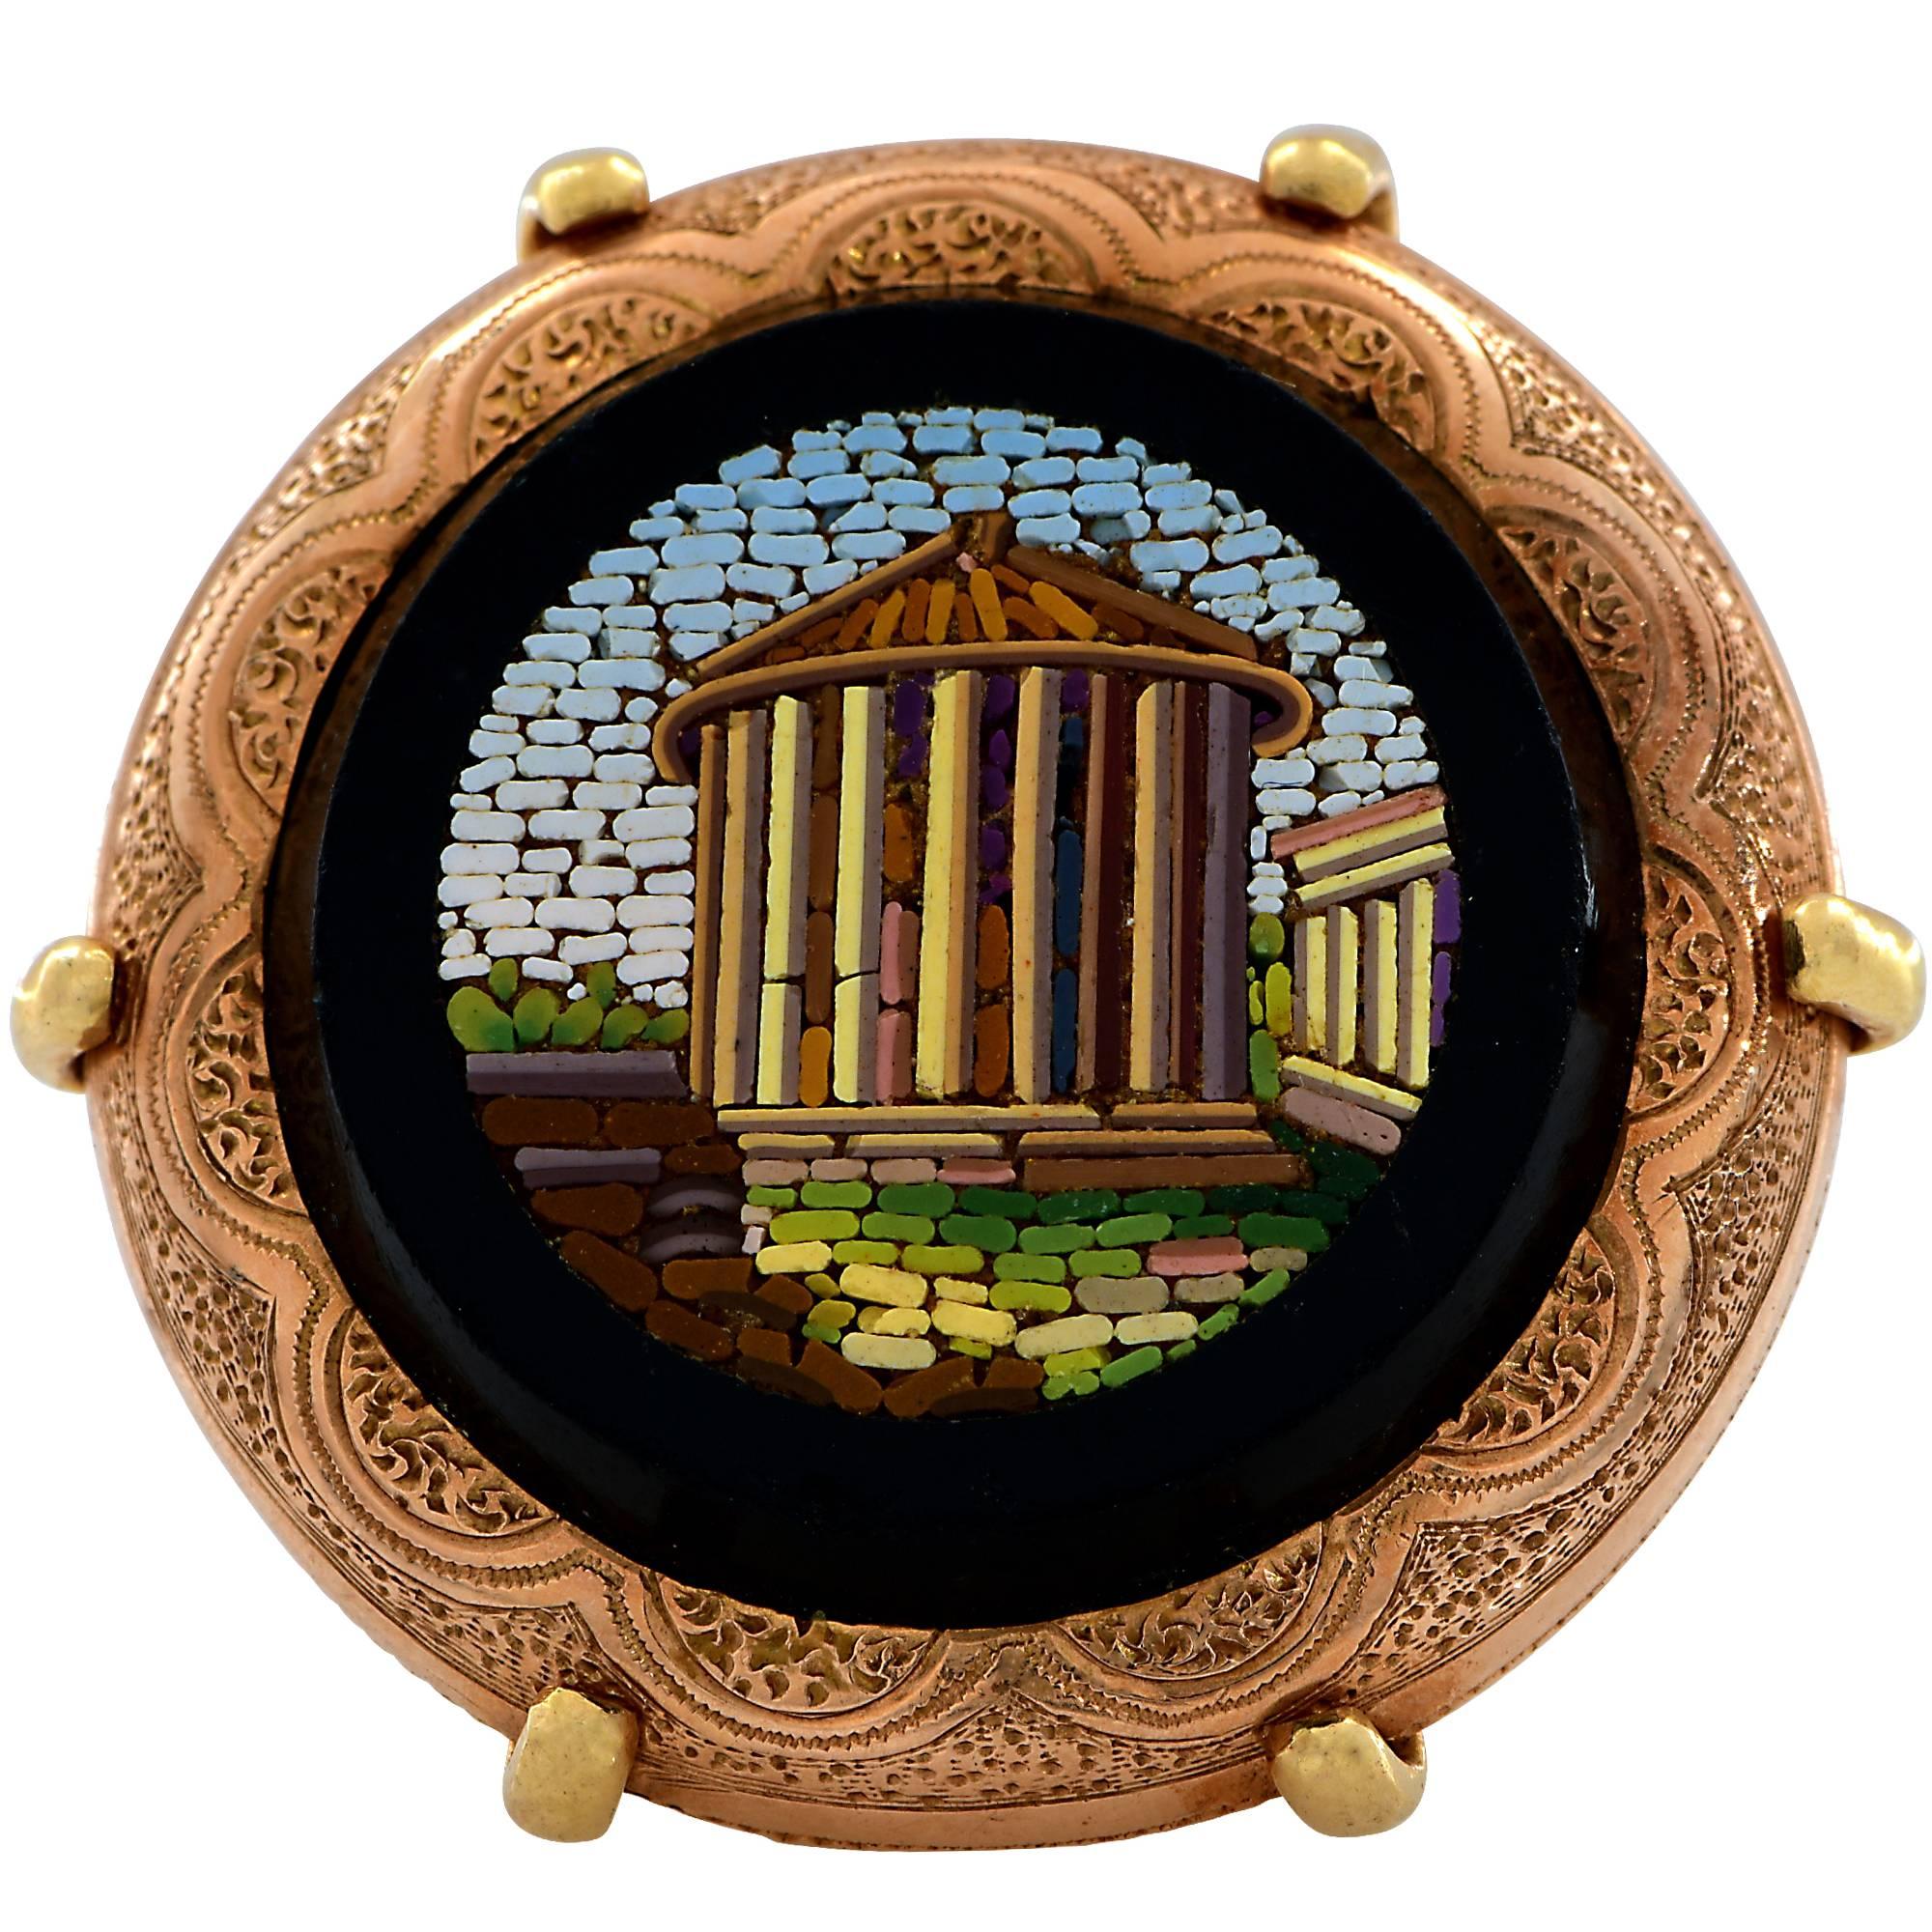 Victorian micro mosaic ring depicting an ancient Roman scene, surrounded by black onyx, measuring 1.2 inches in diameter.

The ring is currently a size 8 and can be sized up or down.
It is stamped and/or tested as 14k gold.
The metal weight is 19.59